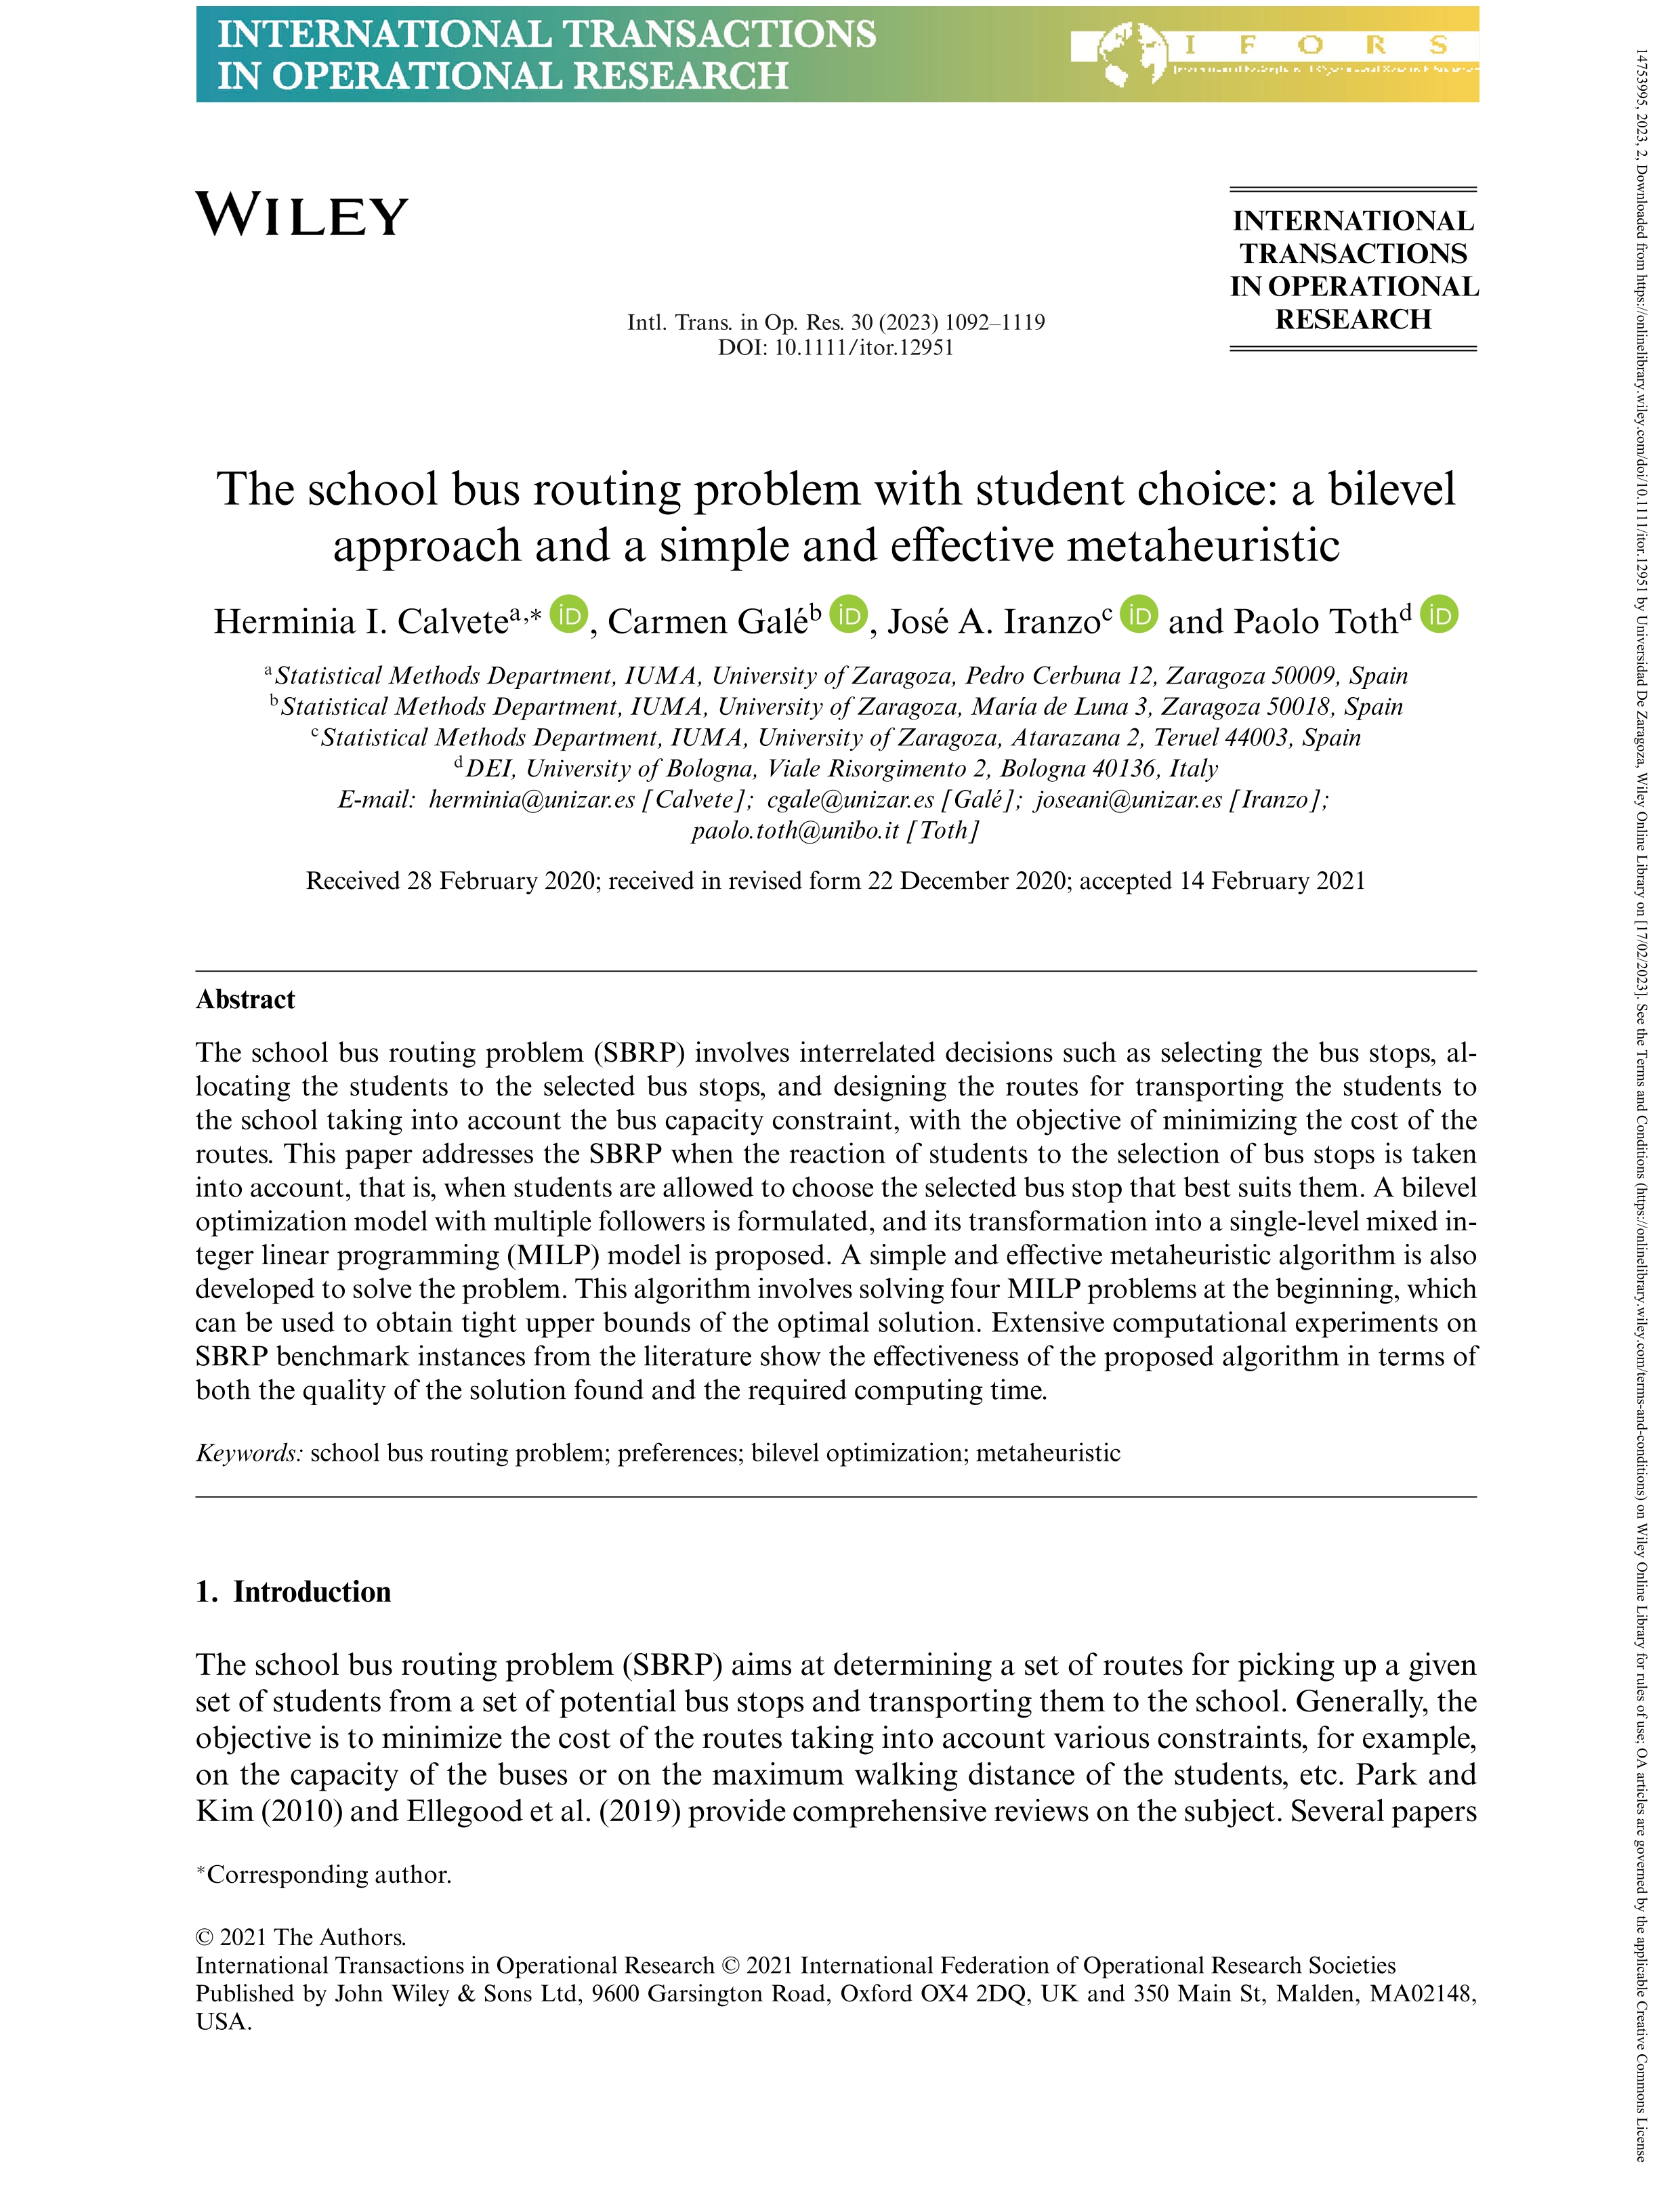 The school bus routing problem with student choice: a bilevel approach and a simple and effective metaheuristic